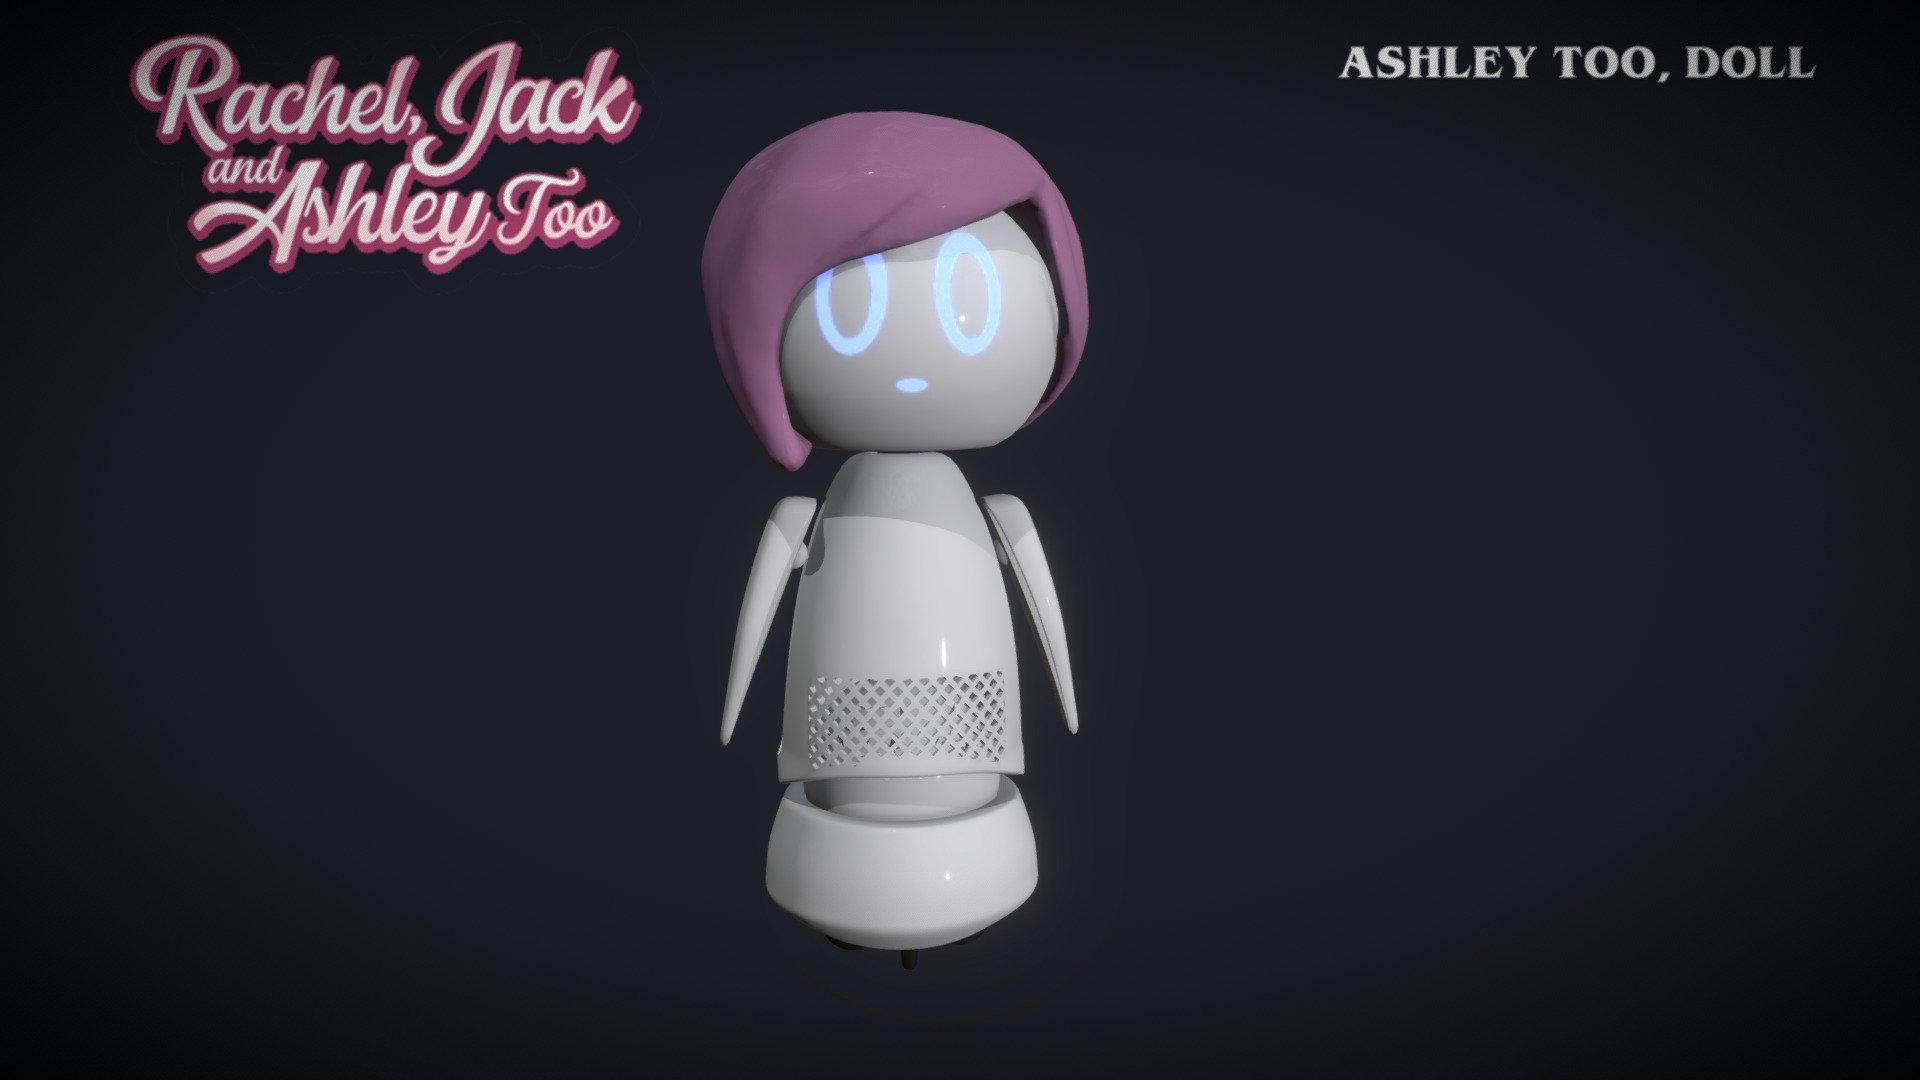 Watched Black Mirror so decided to model &ldquo;Ashley Too